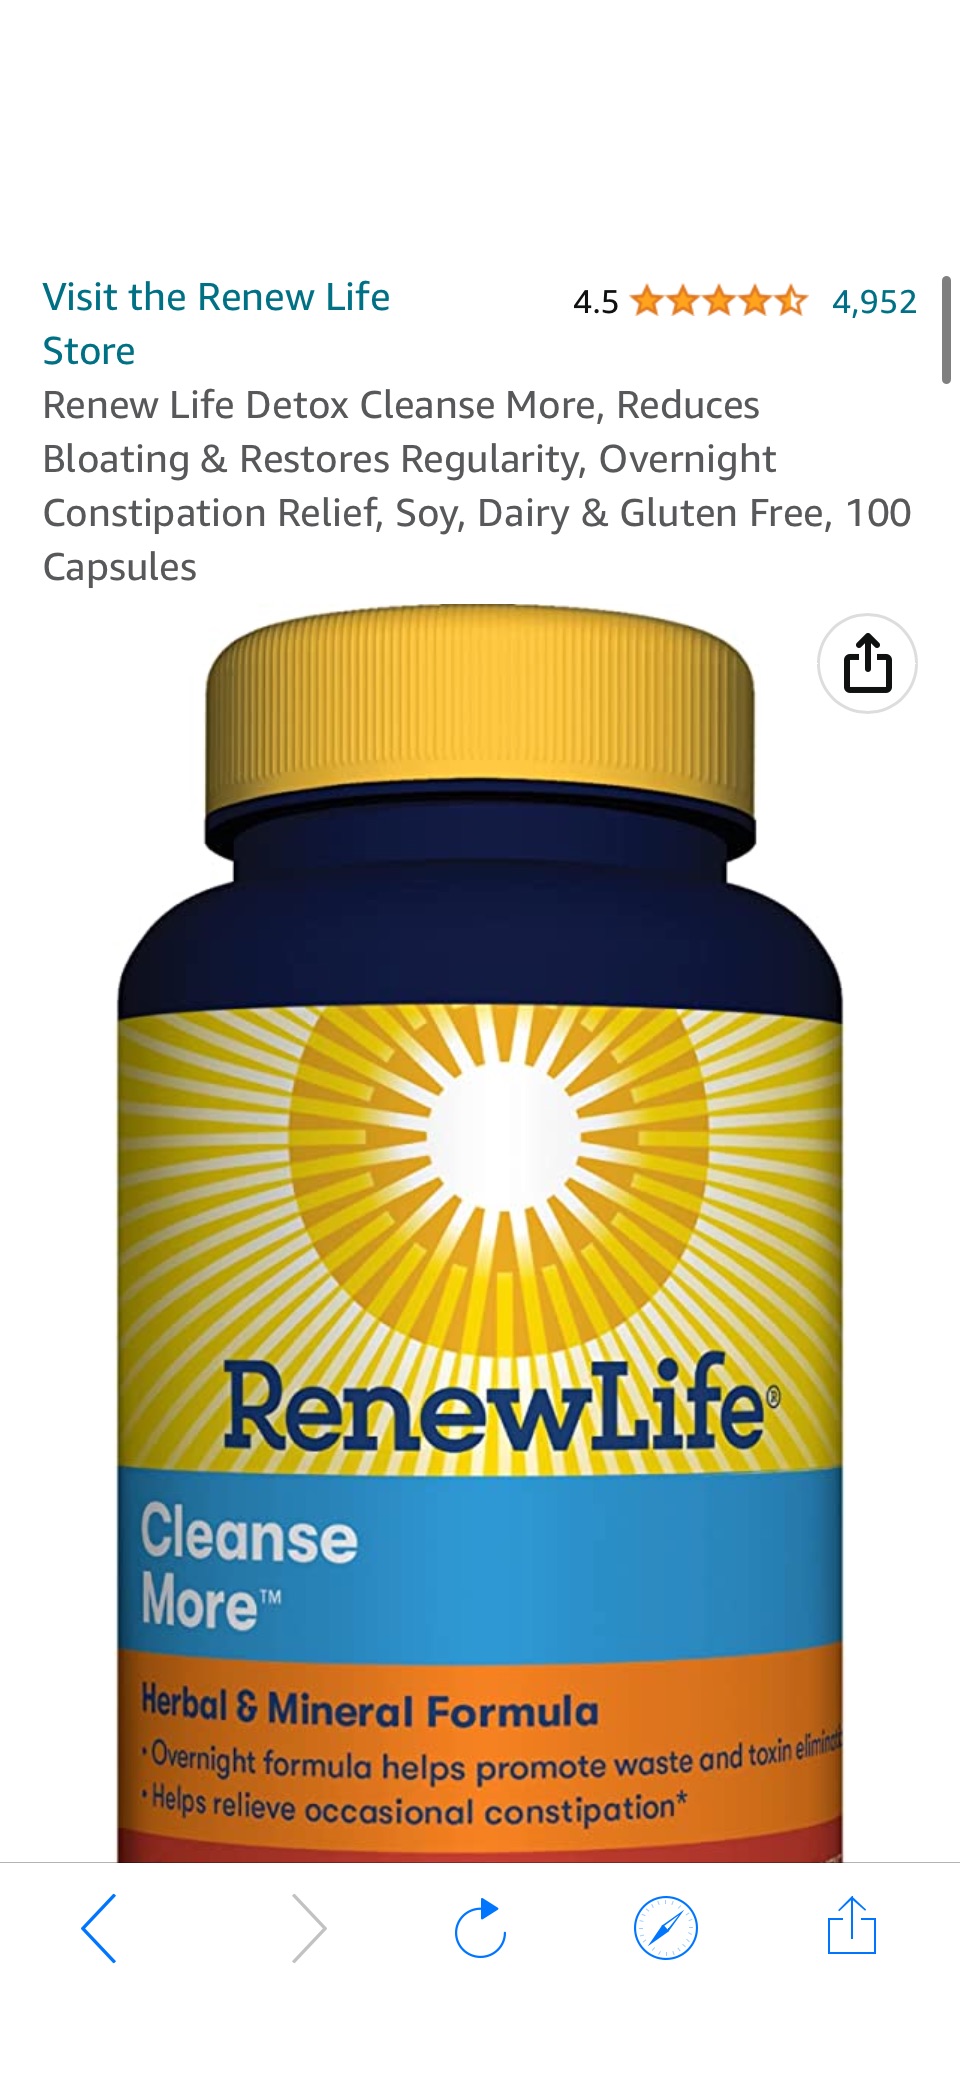 Amazon.com: Renew Life Detox Cleanse More, Reduces Bloating & Restores Regularity, Overnight Constipation Relief, Soy, Dairy & Gluten Free, 100 Capsules : Health & Household原价29.99